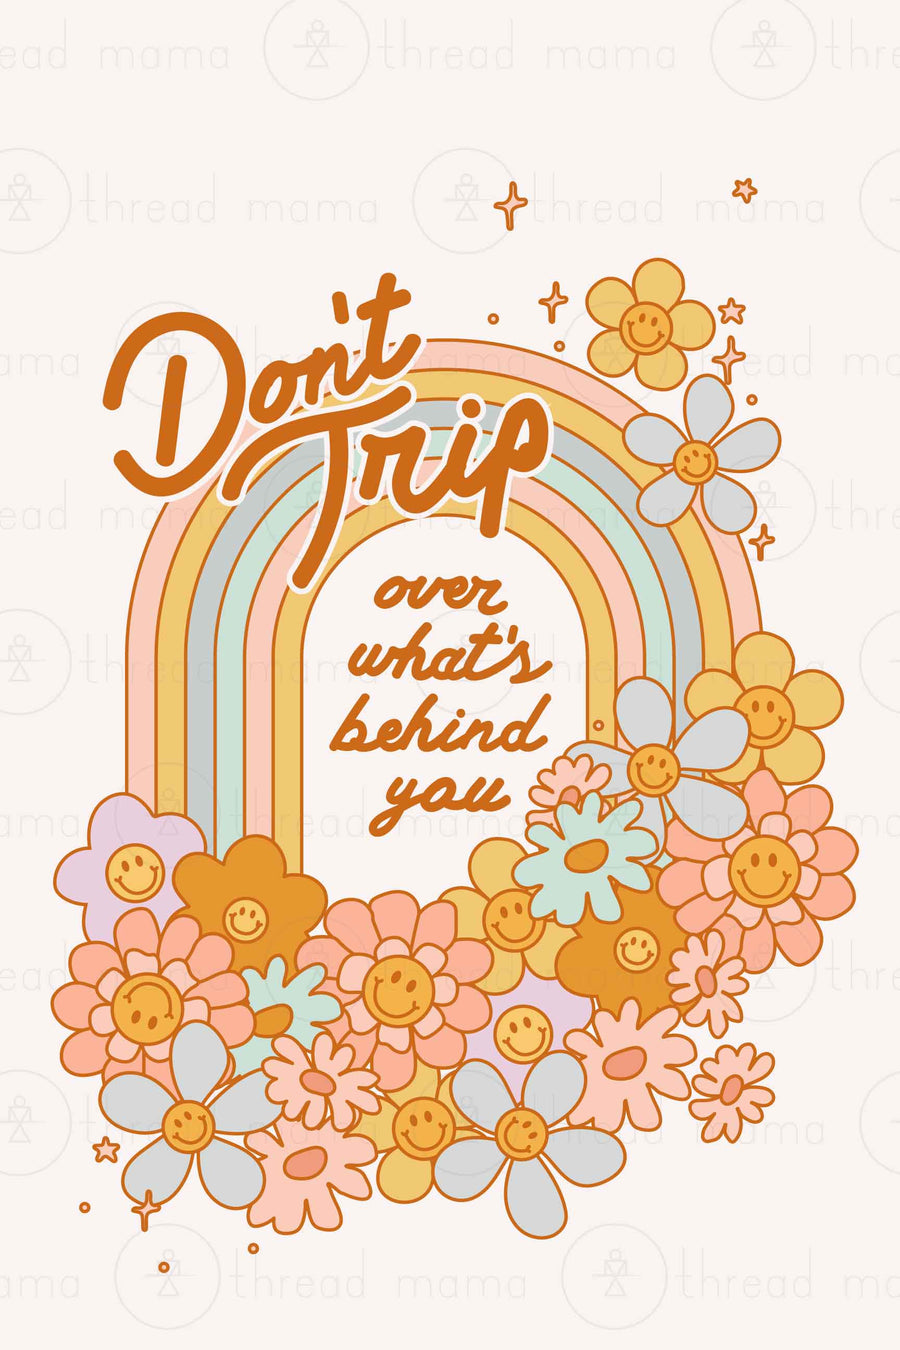 Don't Trip over what's behind you (Printable Poster)